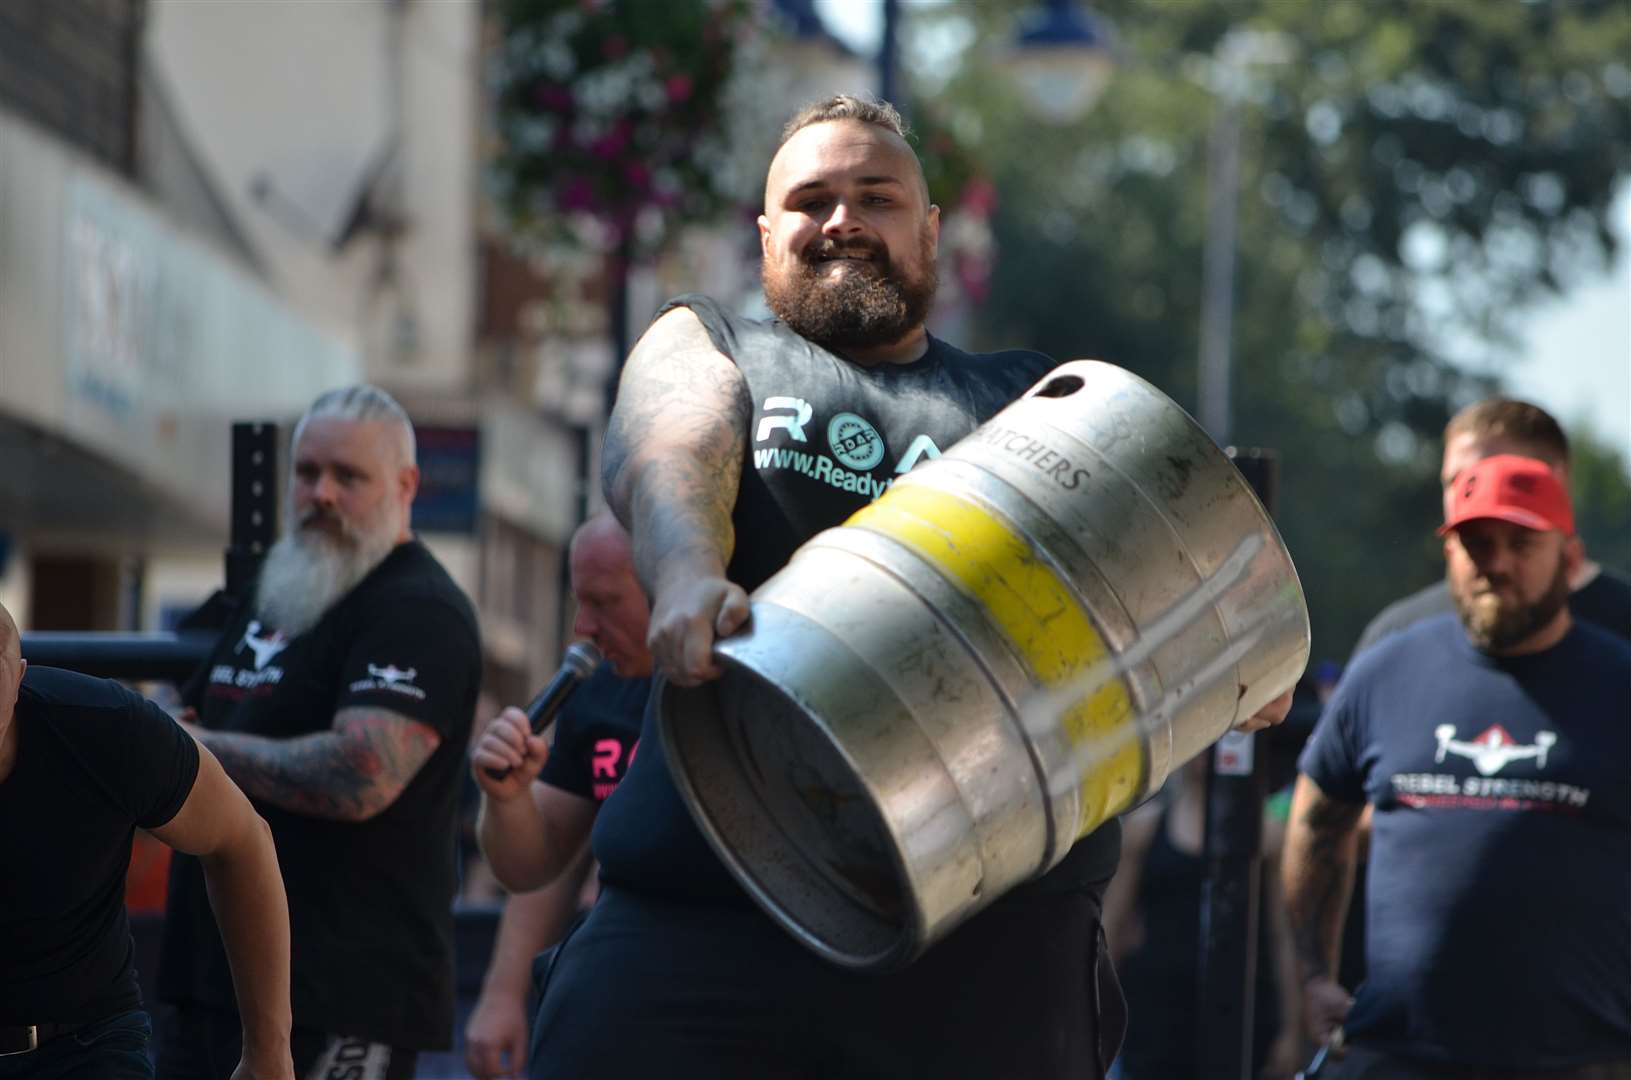 Strongman competition held in Gravesend is cancelled